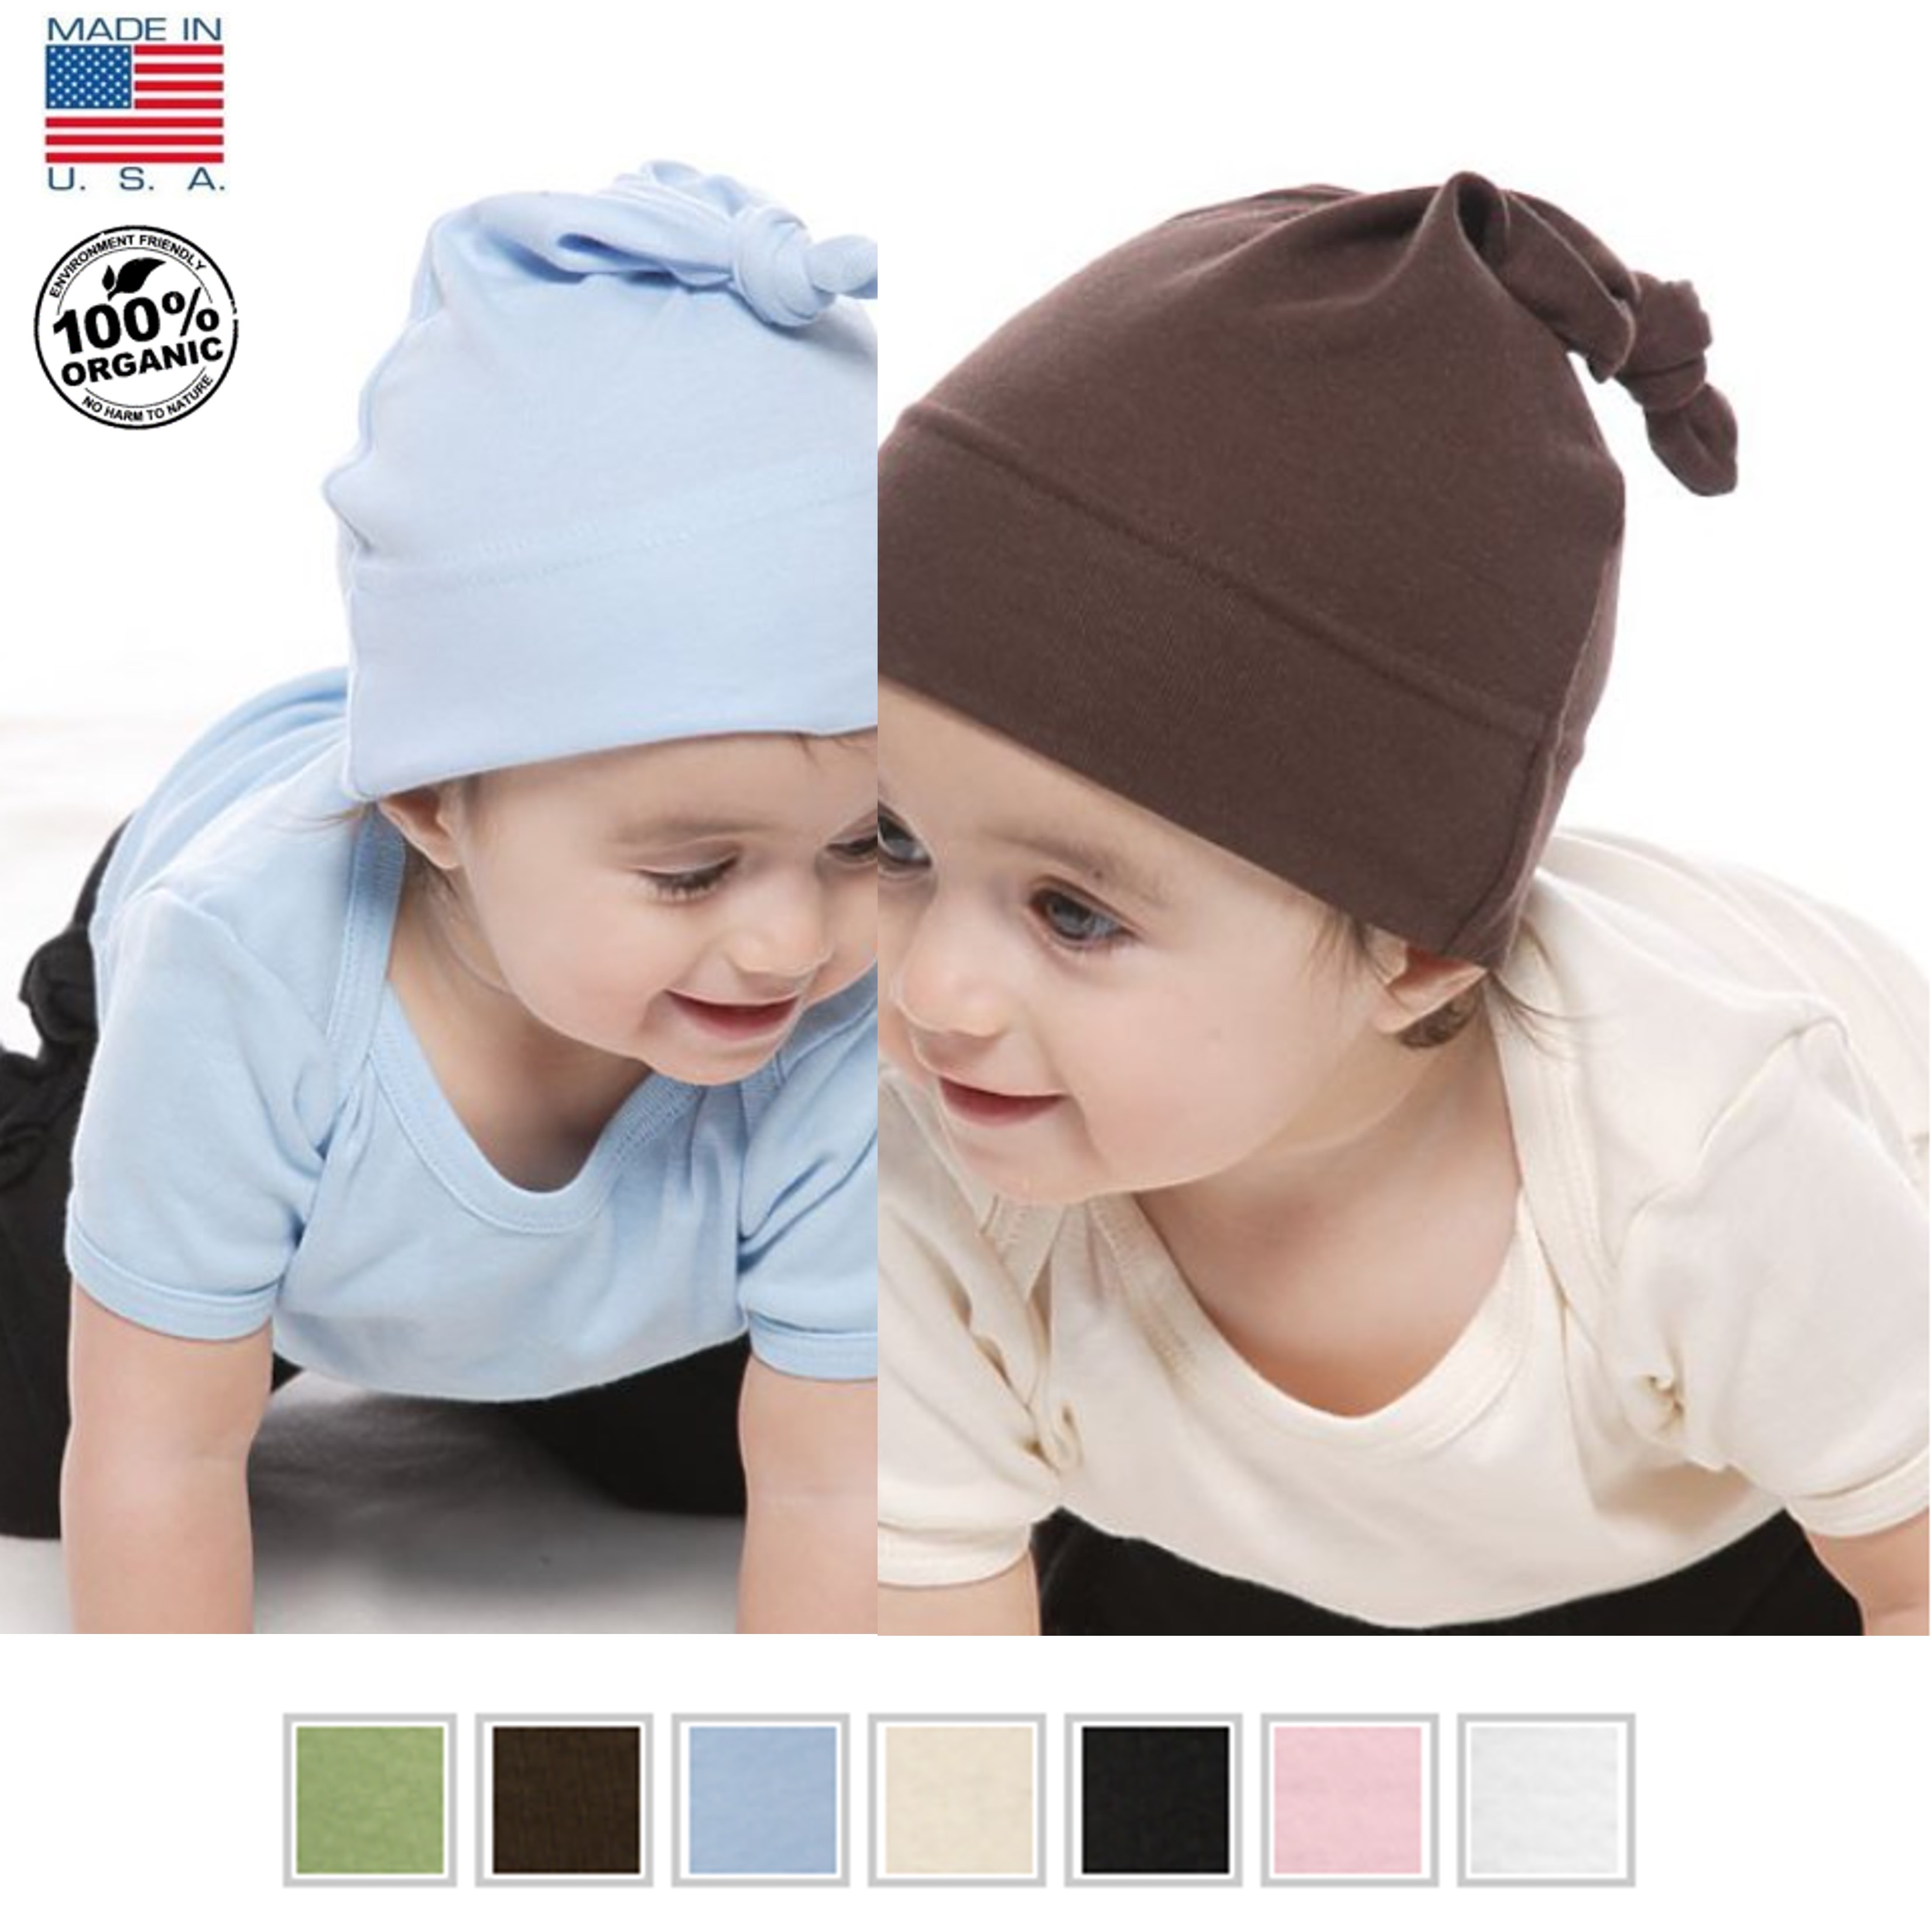 Certified Organic Cotton Infant hat with Logo Imprinted Sustainable Promo